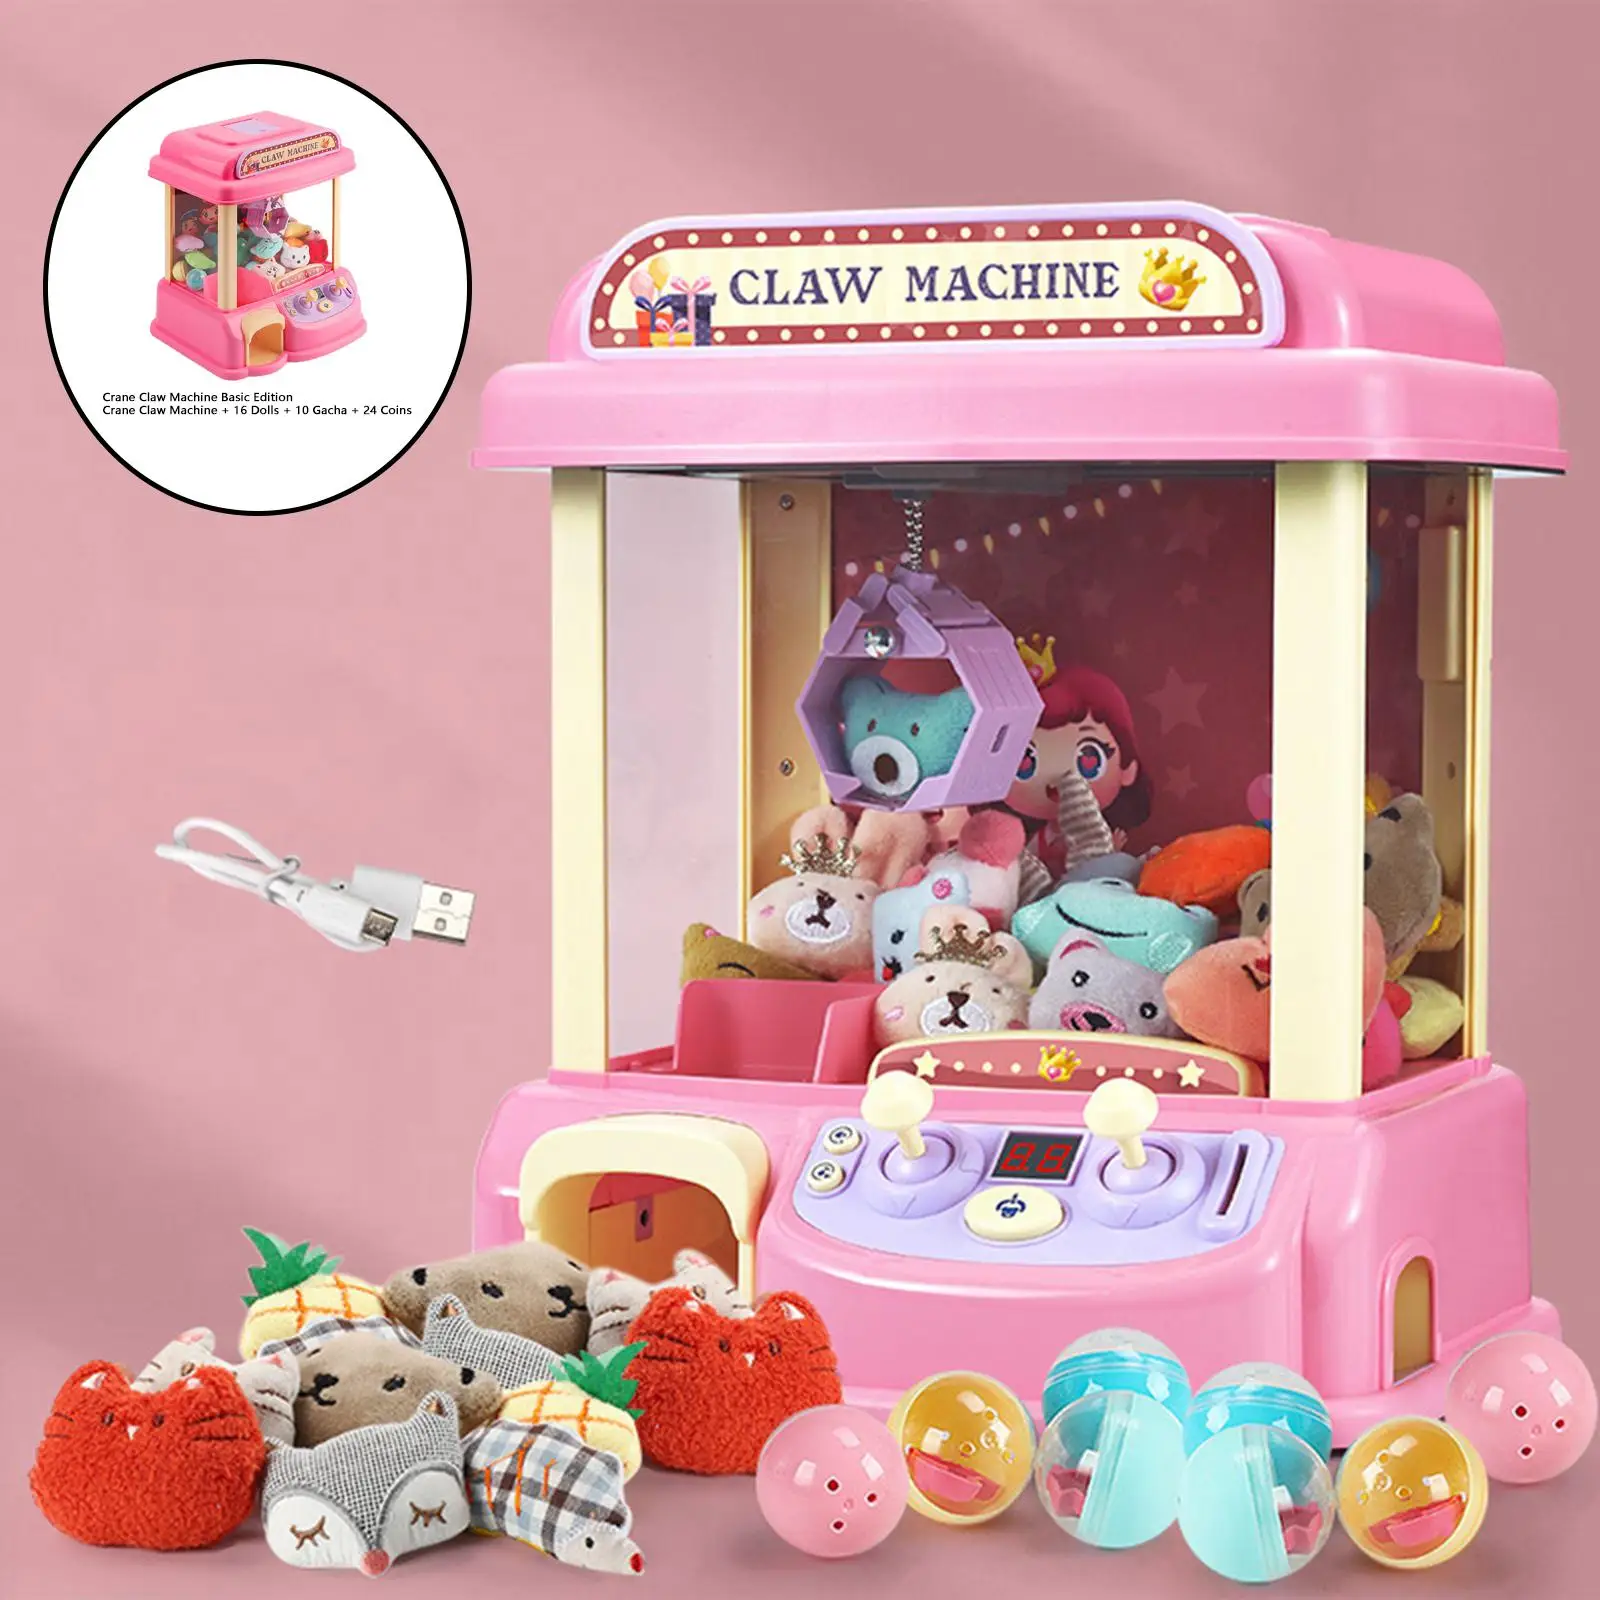 Claw Machine Electronic Lights Sound Intelligent System Catching Doll Machine Crane Machines Coin Operated Play Game for Kids